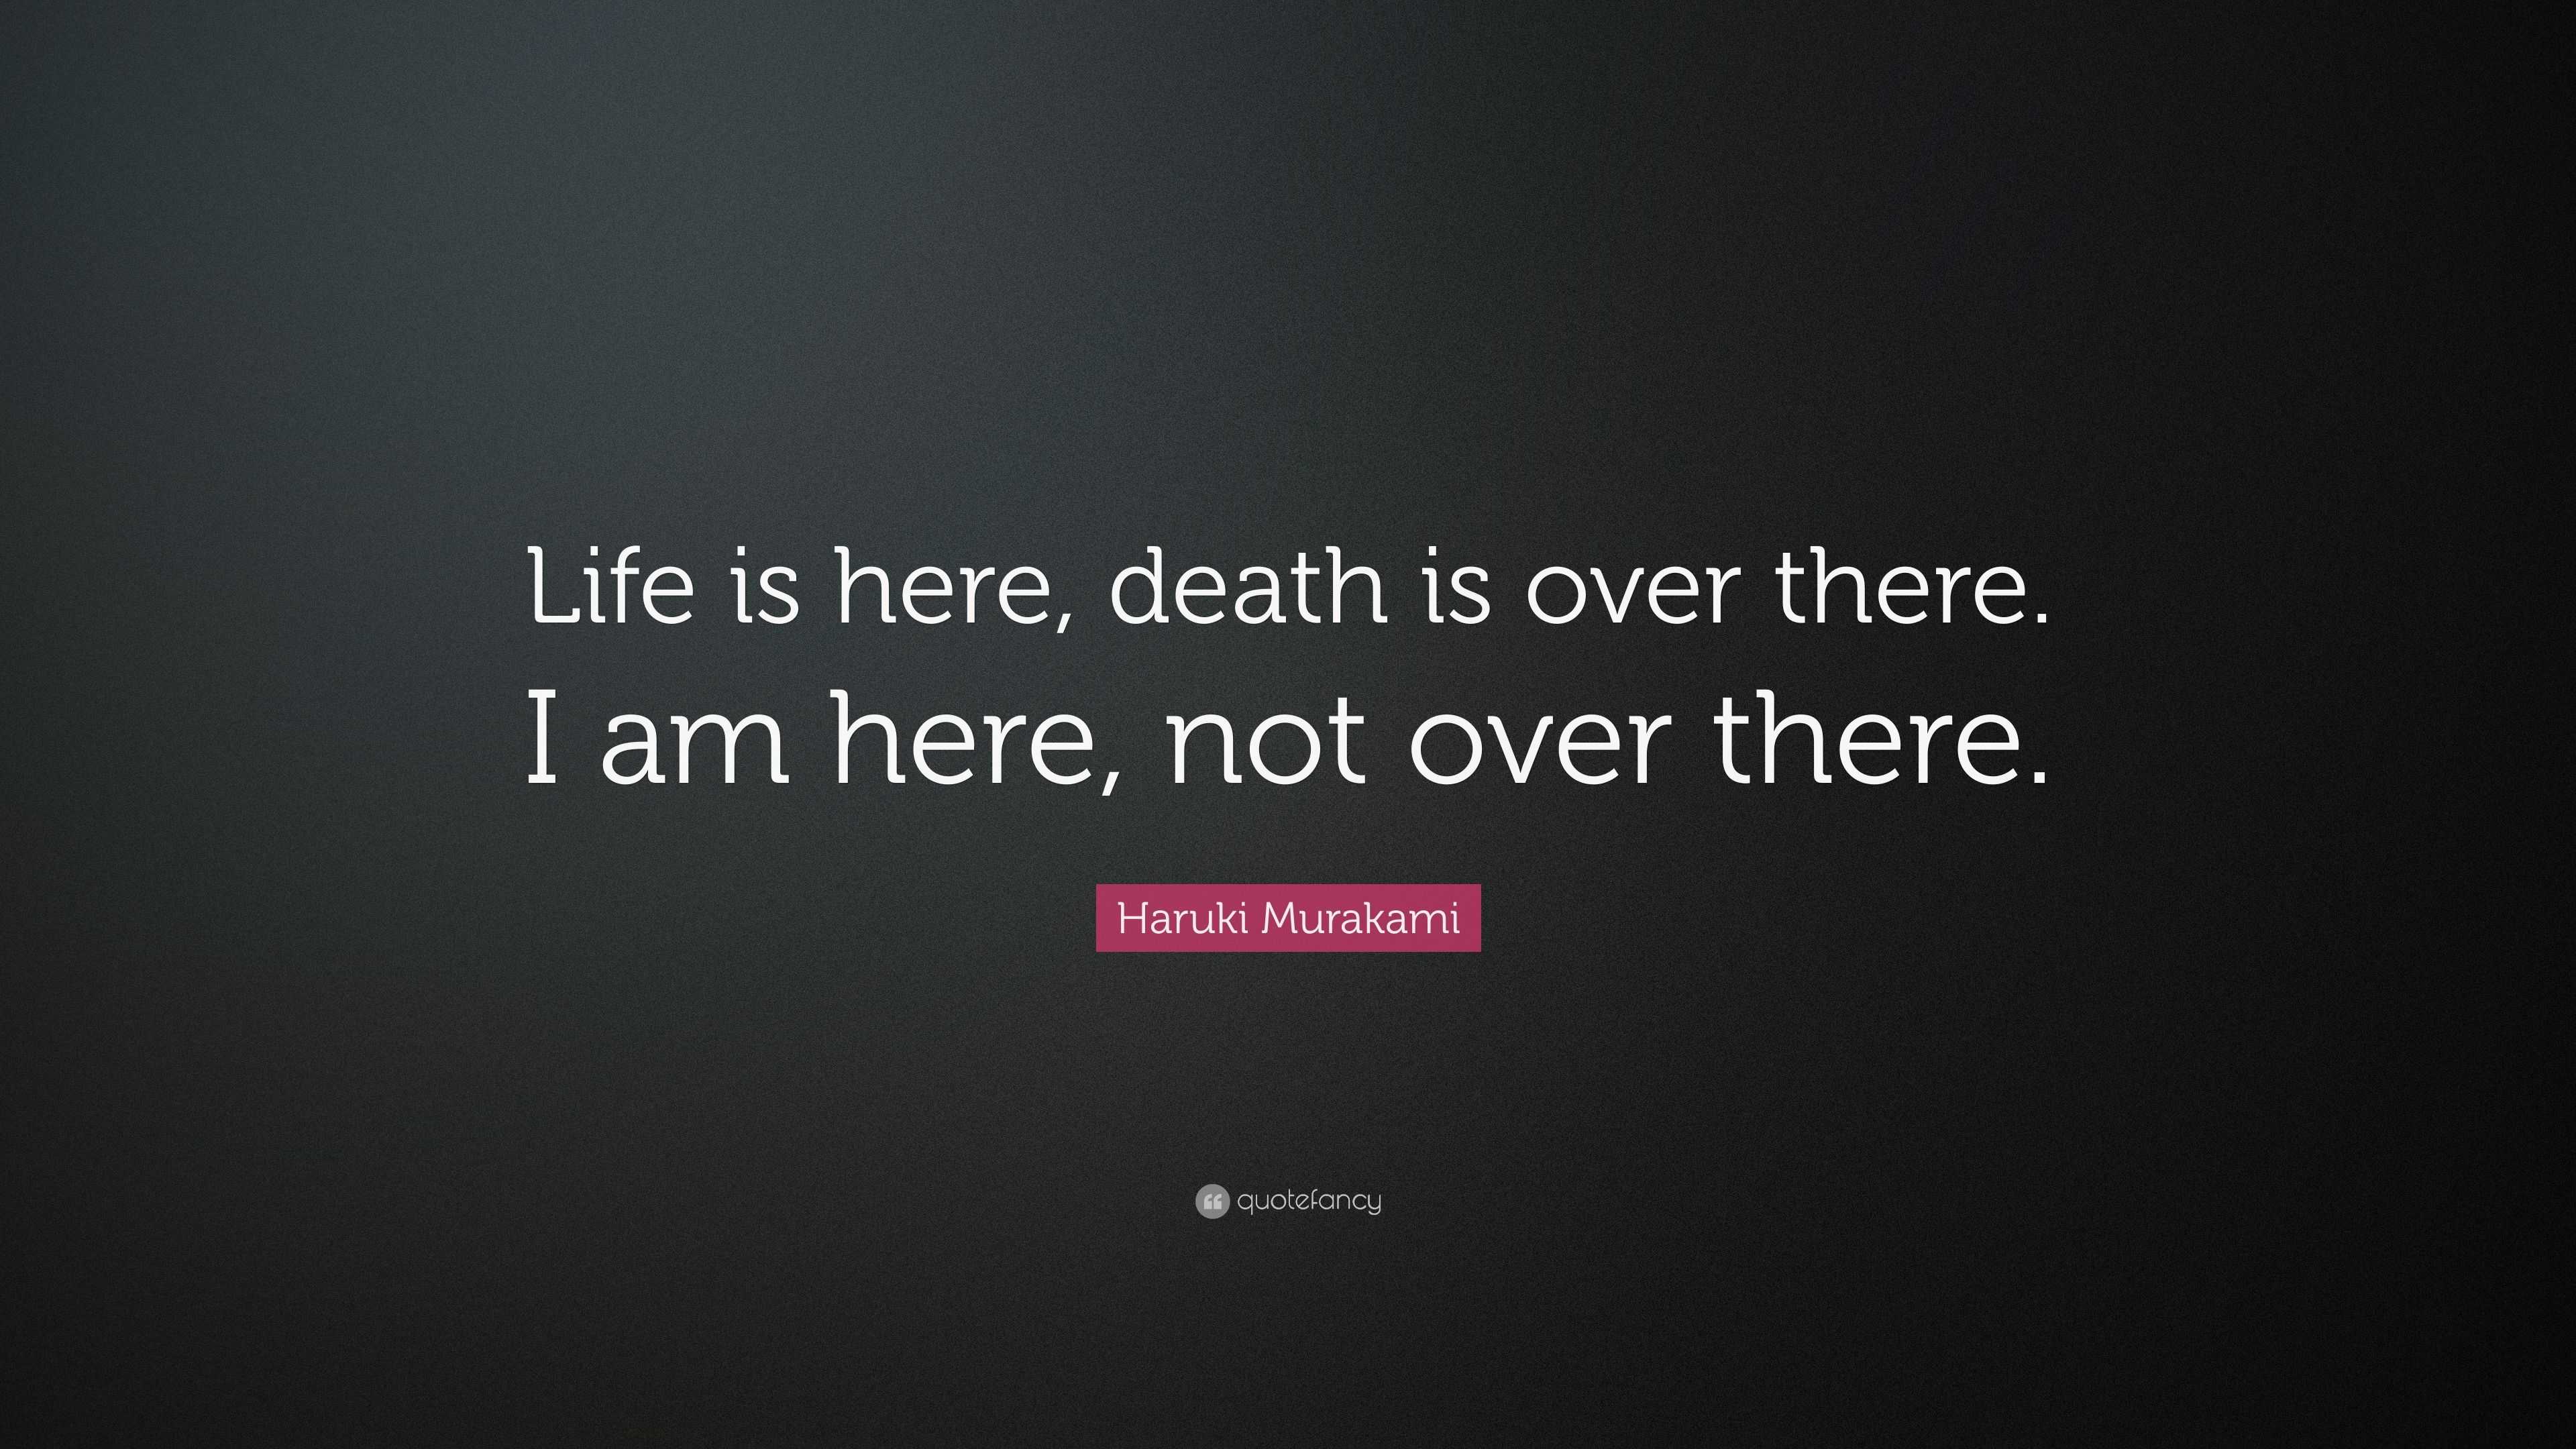 Haruki Murakami Quote: “Life is here, death is over there. I am here ...